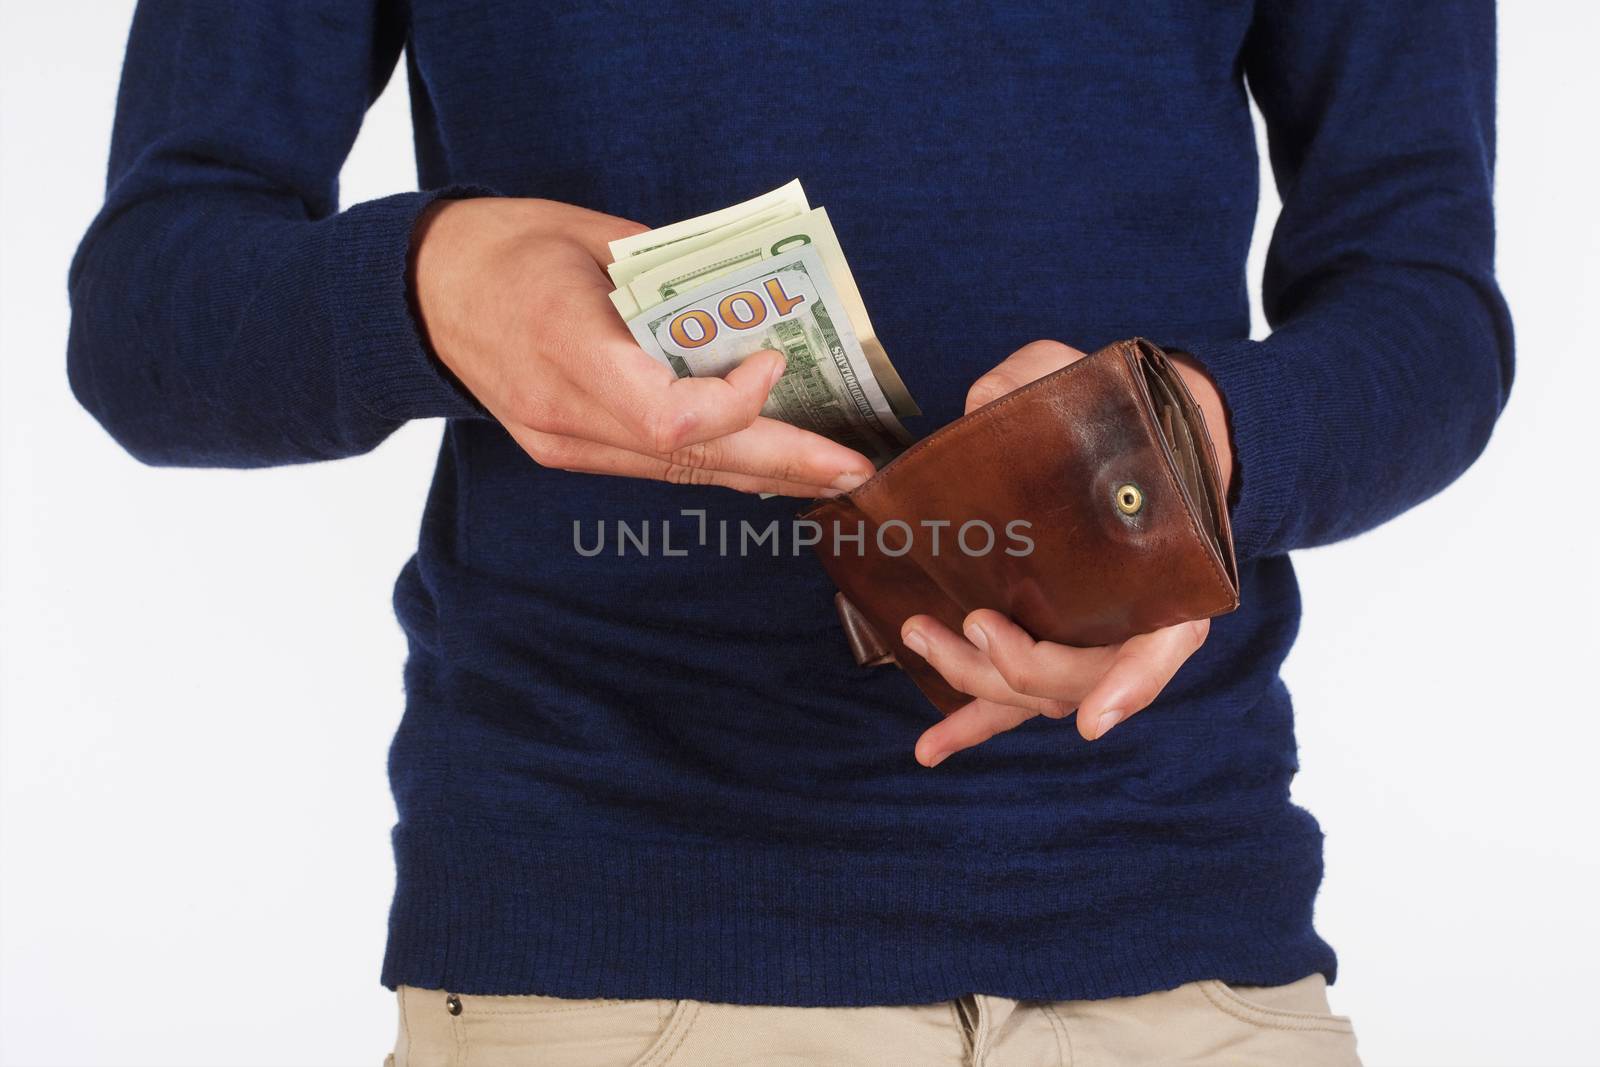 Man Holding a Wallet and Counting Dollar Bills